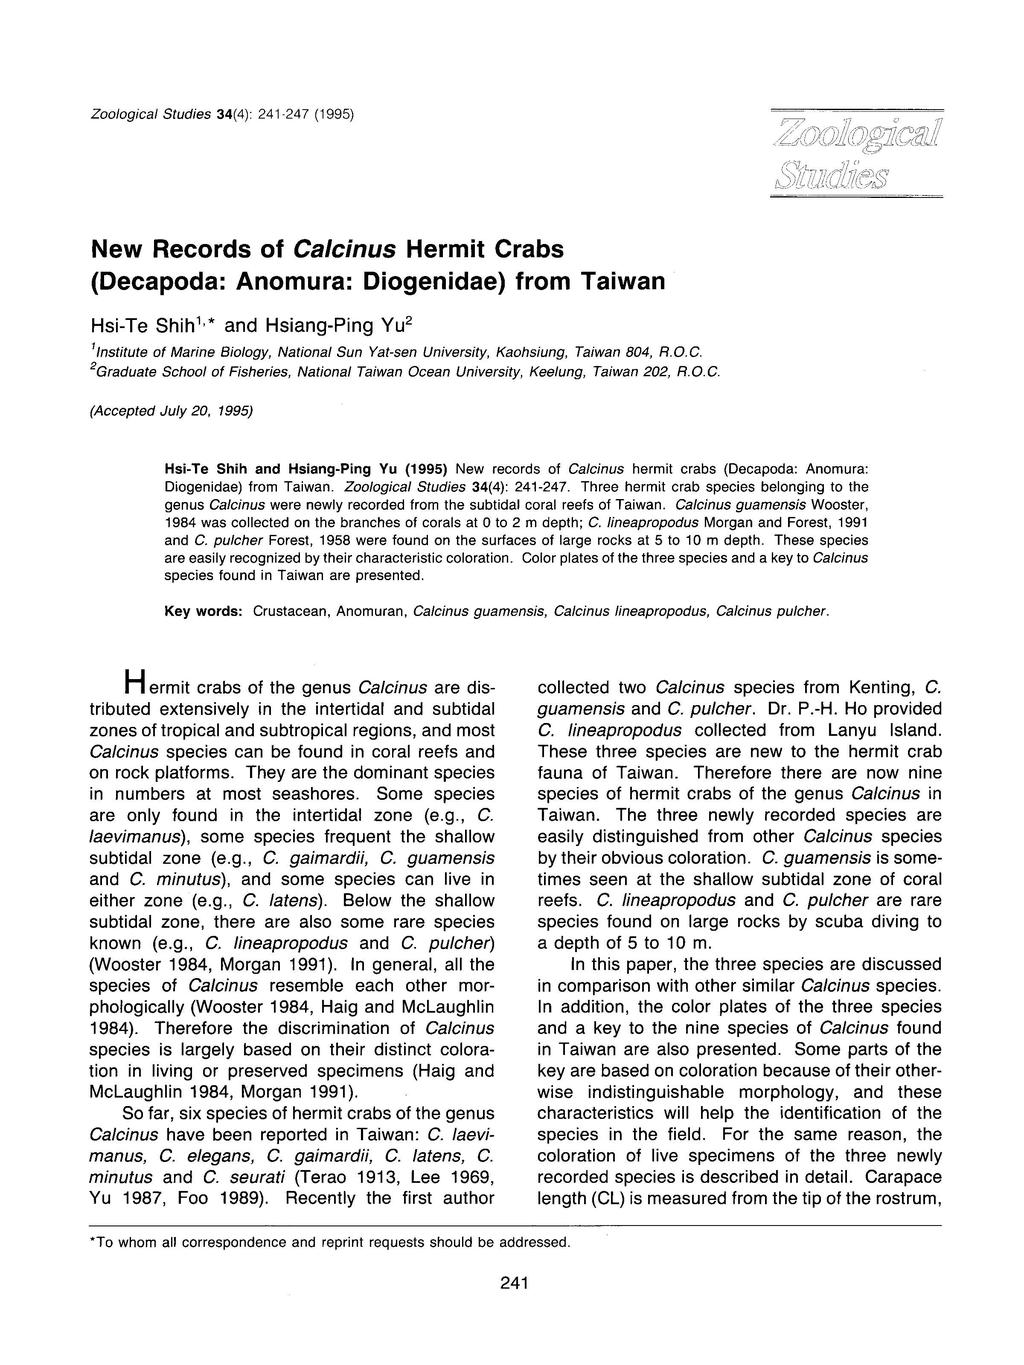 Zoological Studies 34(4): 241-247 (1995) New Records of Ca/cinus Hermit Crabs (Decapoda: Anomura: Diogenidae) from Taiwan Hsi-Te Shih 1,* and Hsiang-Ping Yu 2 Ilnstitute of Marine Biology, National